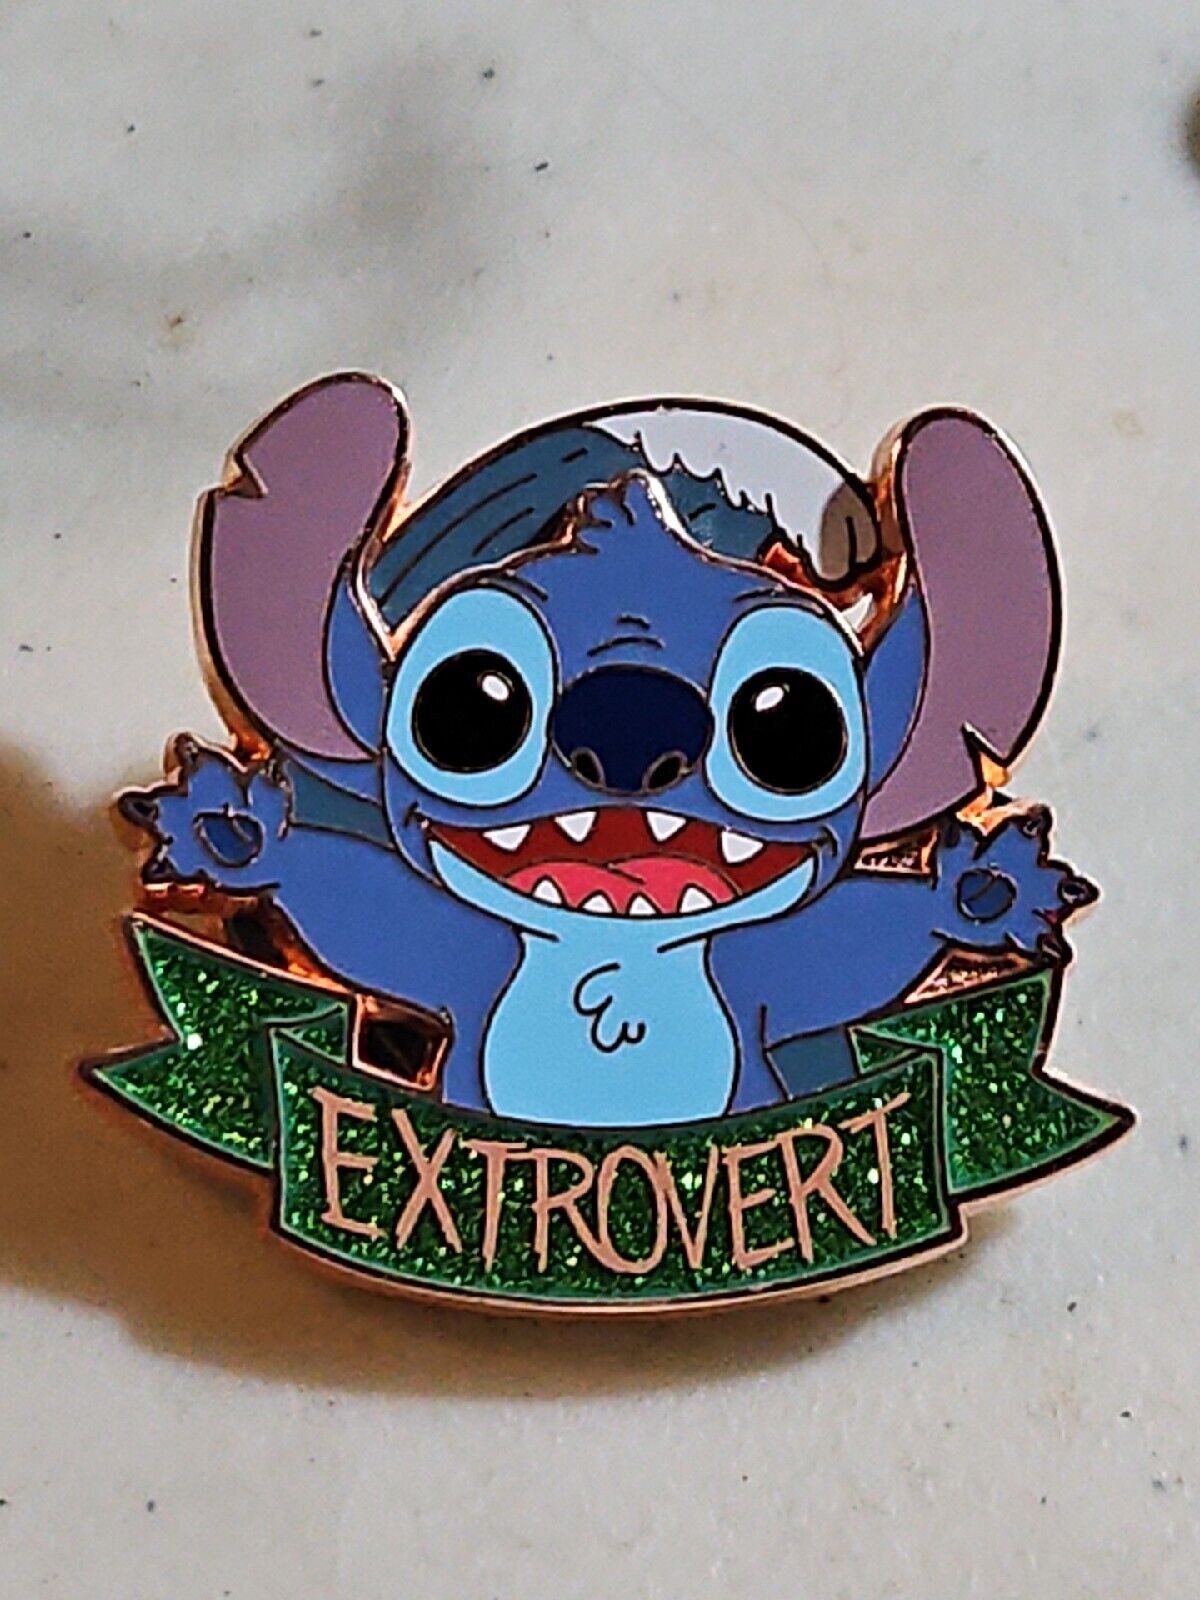 Disney One Family Celebration Personality Stitch Extrovert LE 300 Pin